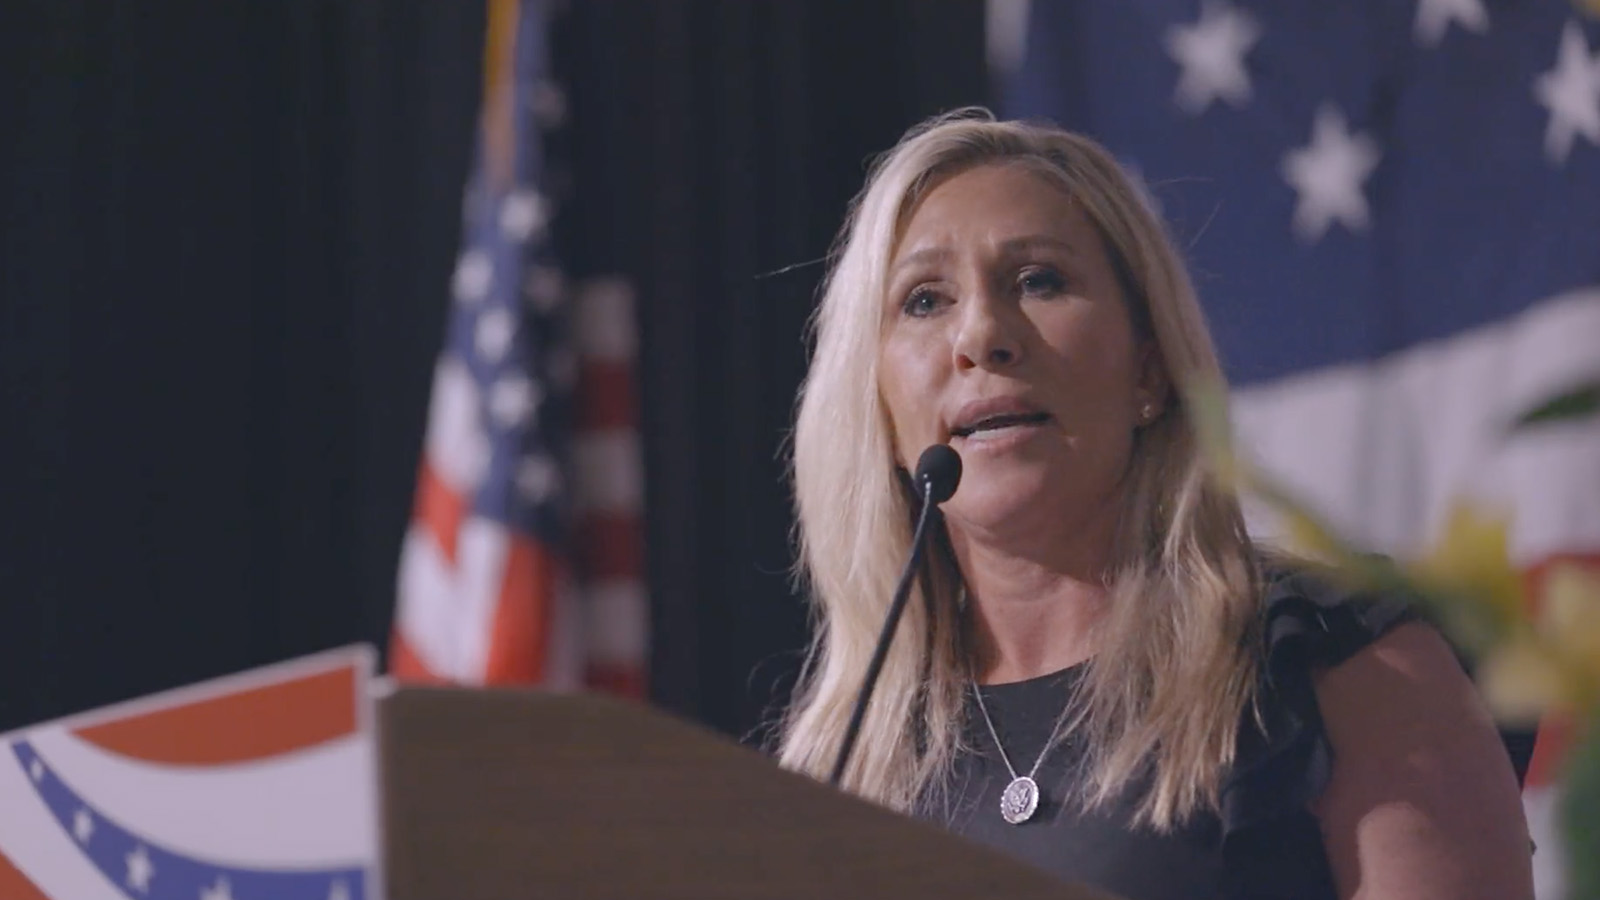 Rep. Marjorie Taylor Greene speaks at the Kootenai County Republican Central Committee Lincoln Day event in Coeur d'Alene, Idaho. Video screen grab